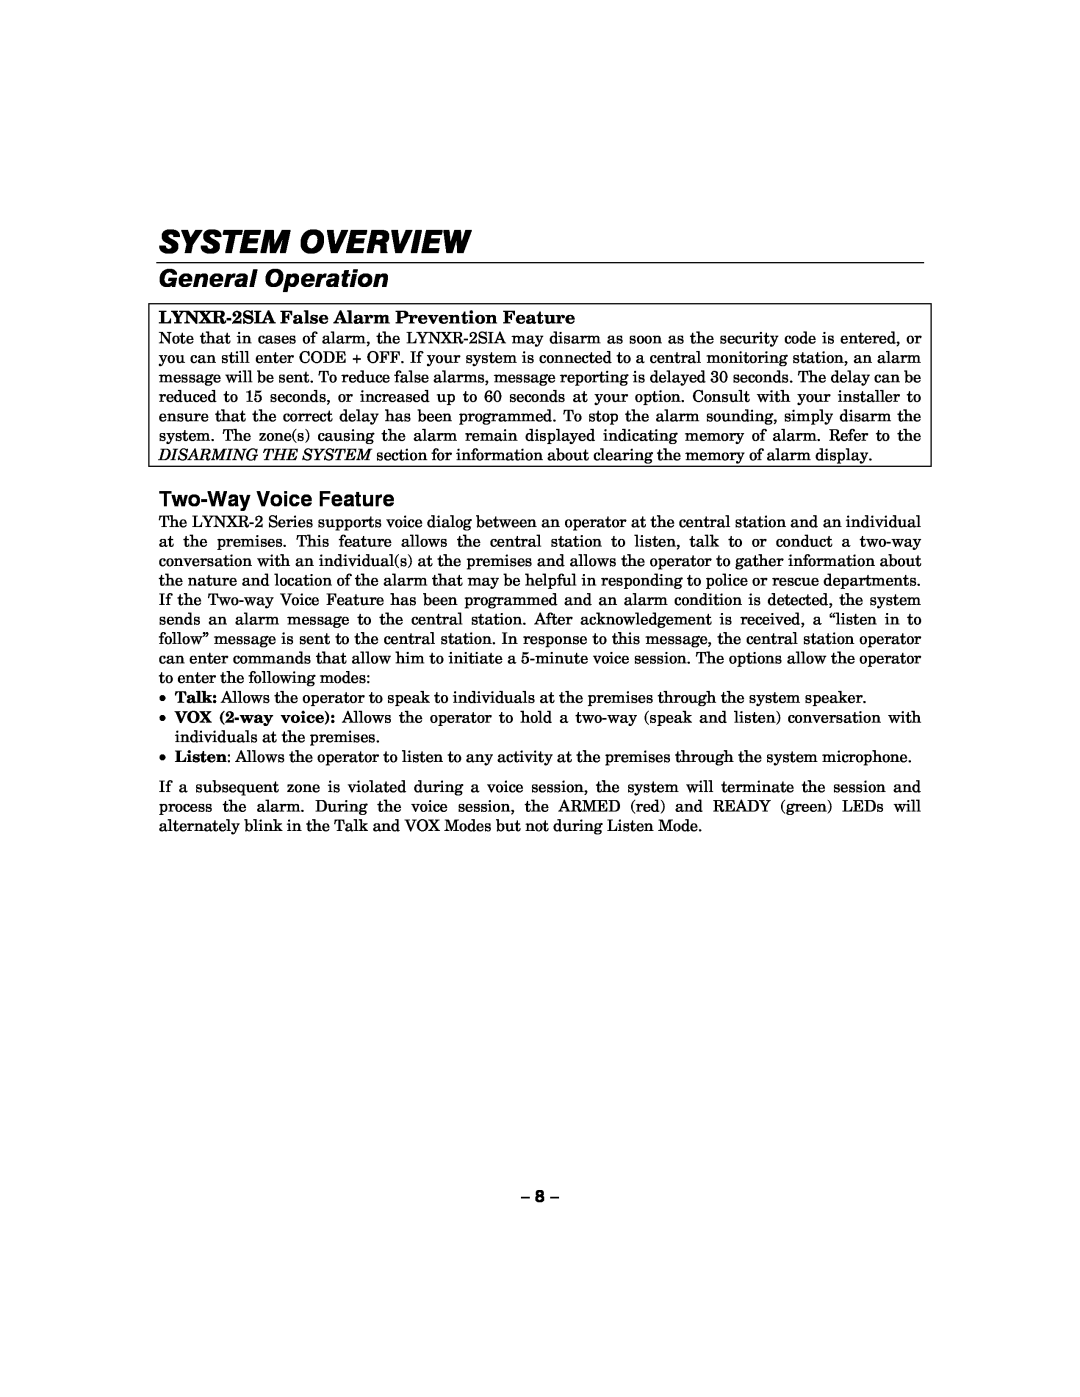 Honeywell manual Two-WayVoice Feature, LYNXR-2SIAFalse Alarm Prevention Feature, System Overview, General Operation 